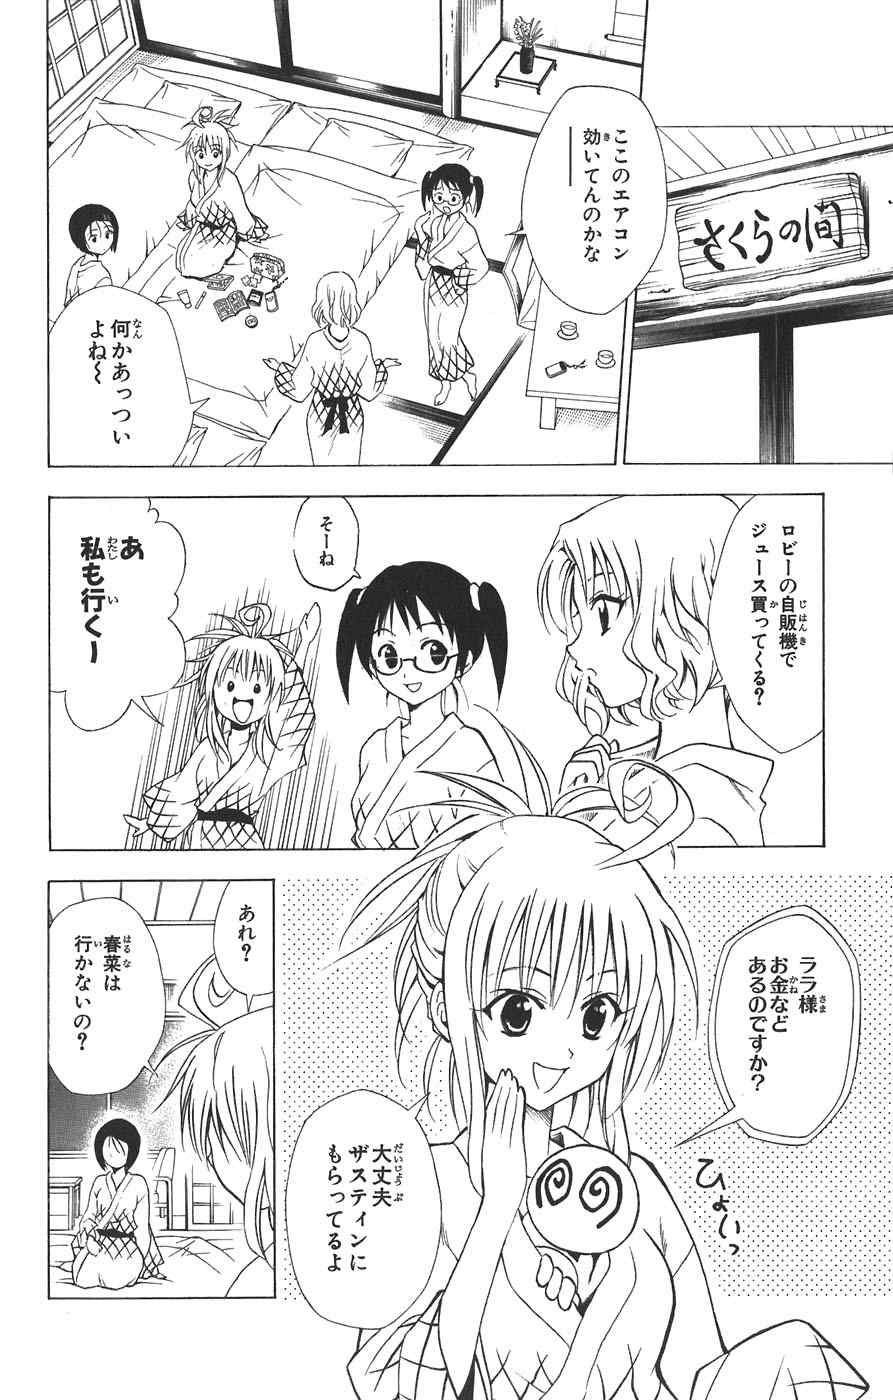 《To LOVEるとらぶる》漫画 To LOVE 03卷